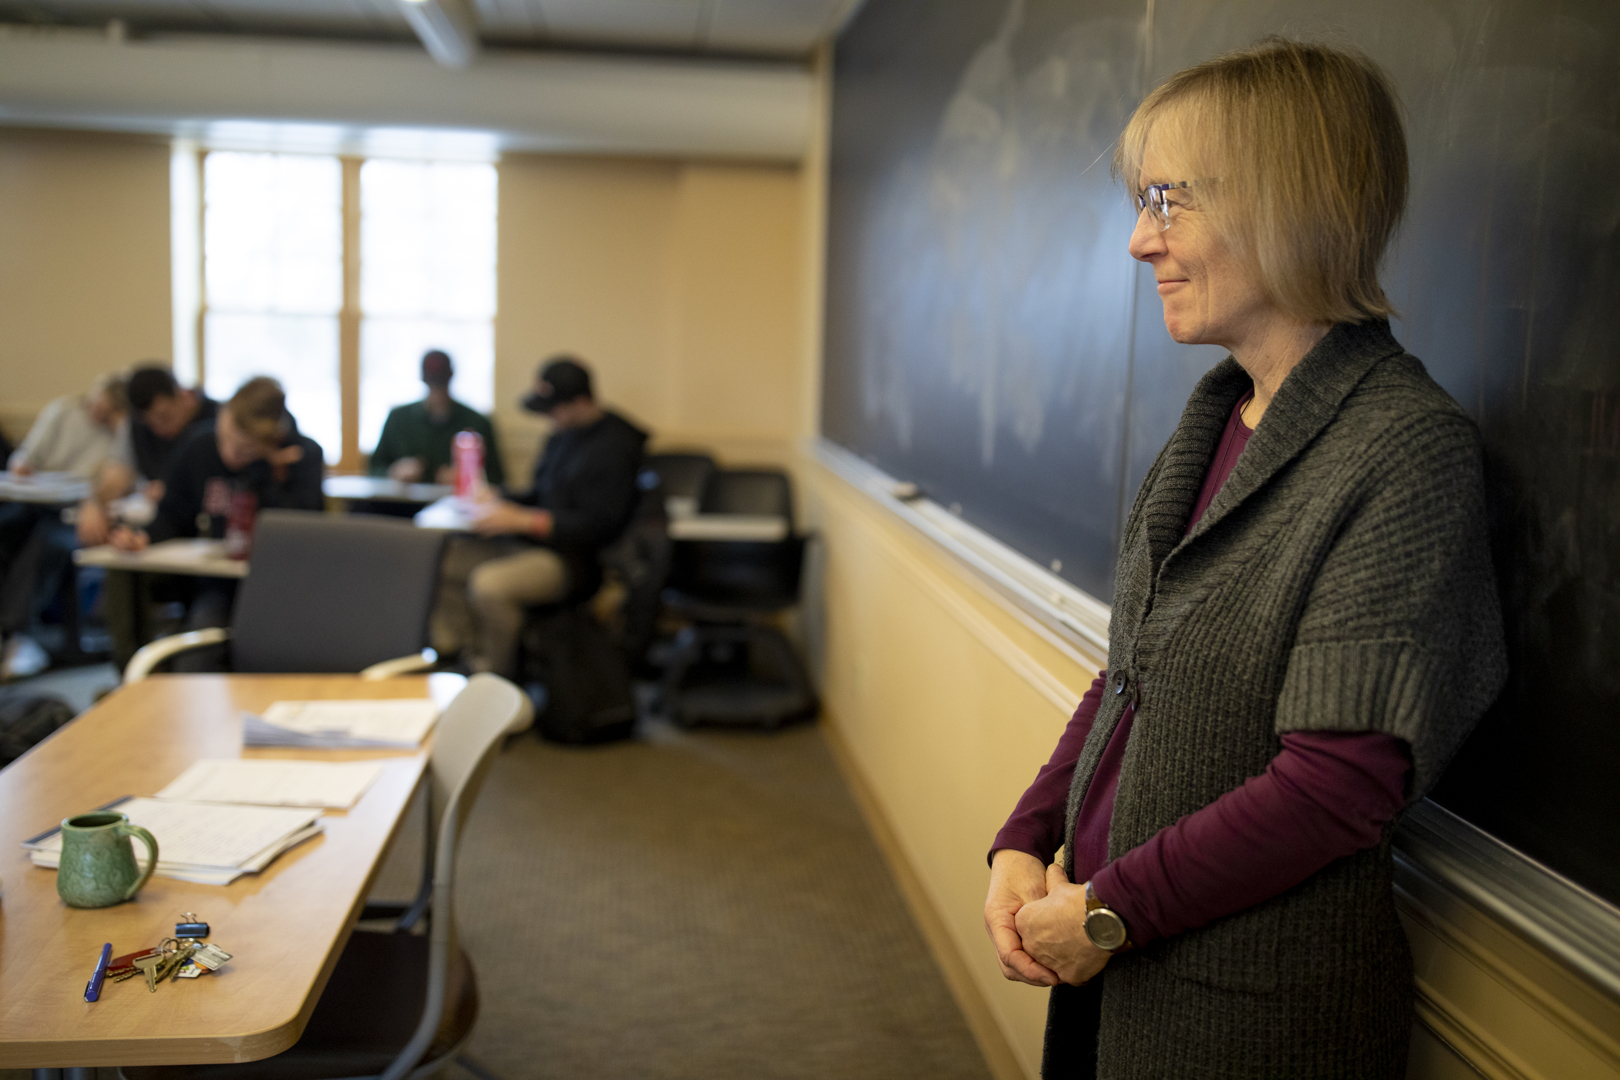 Costlow observes her "Catastrophes and Hope" students on the first day of the semester. (Phyllis Graber Jensen/Bates College)